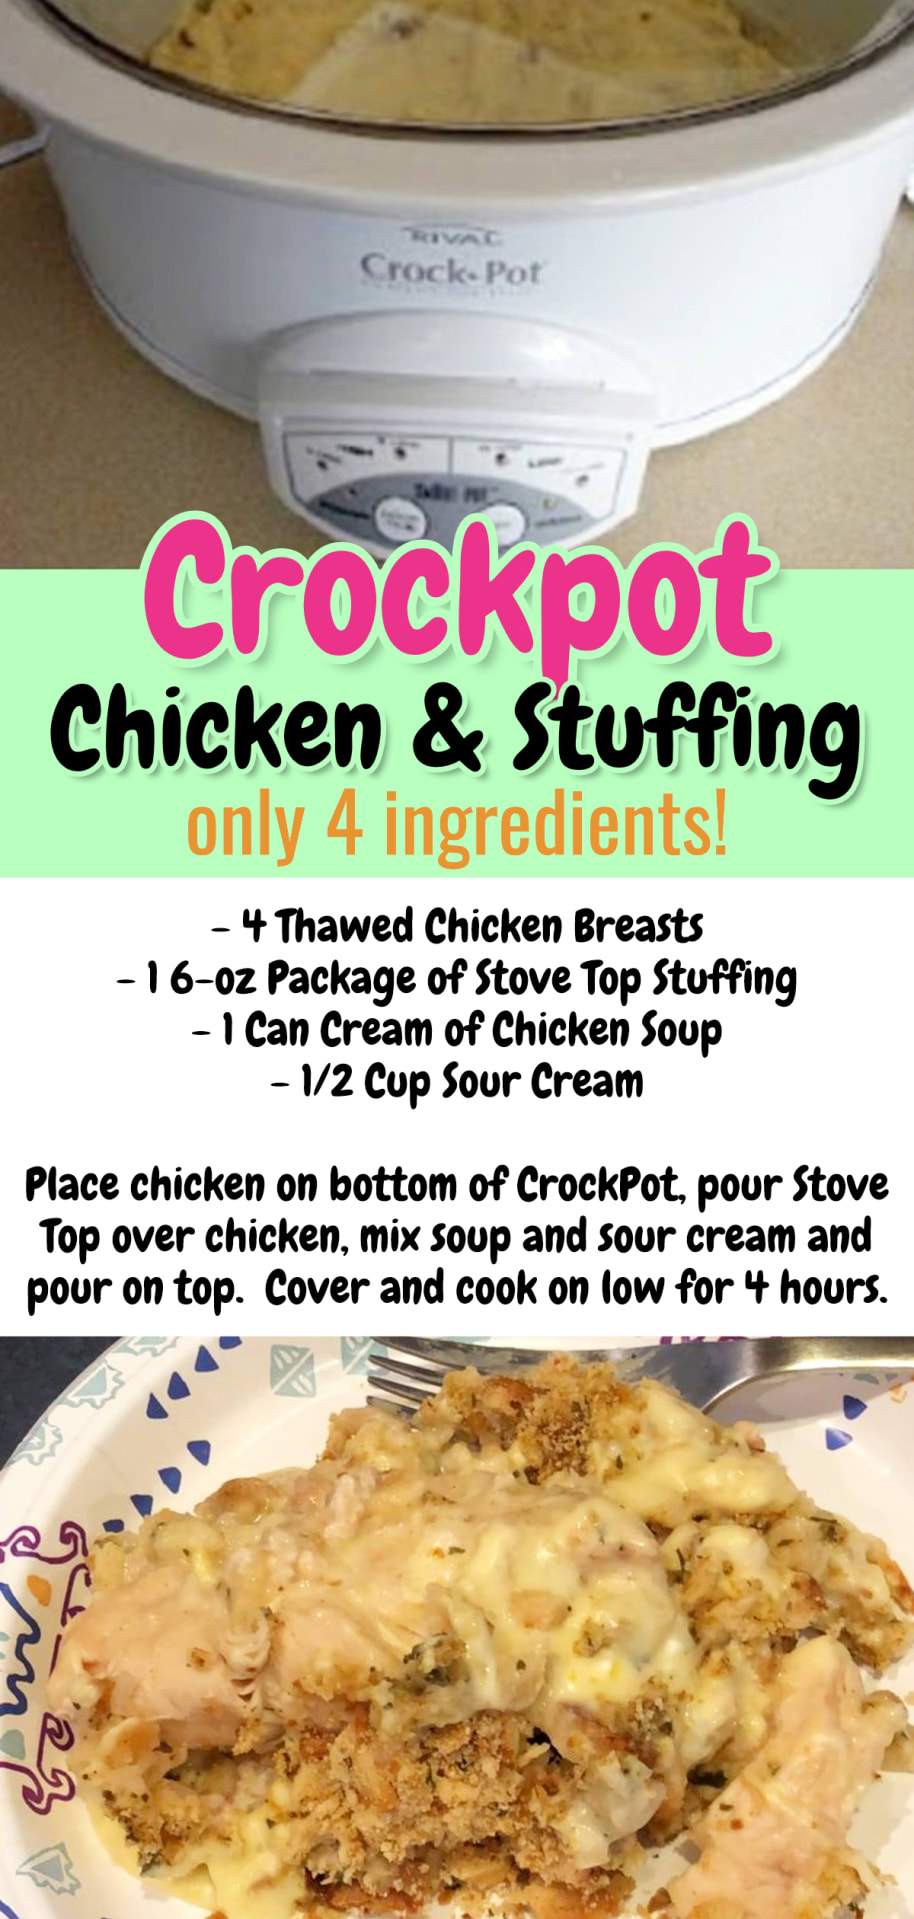 Easy Crockpot Chicken Recipes - crock-pot slow cooker chicken and stuffing - only 4 ingredients!  Easy dinner recipes with few ingredients - easy crockpot meals for 2 or for family dinner (great for picky eaters) - one pot dinner recipes